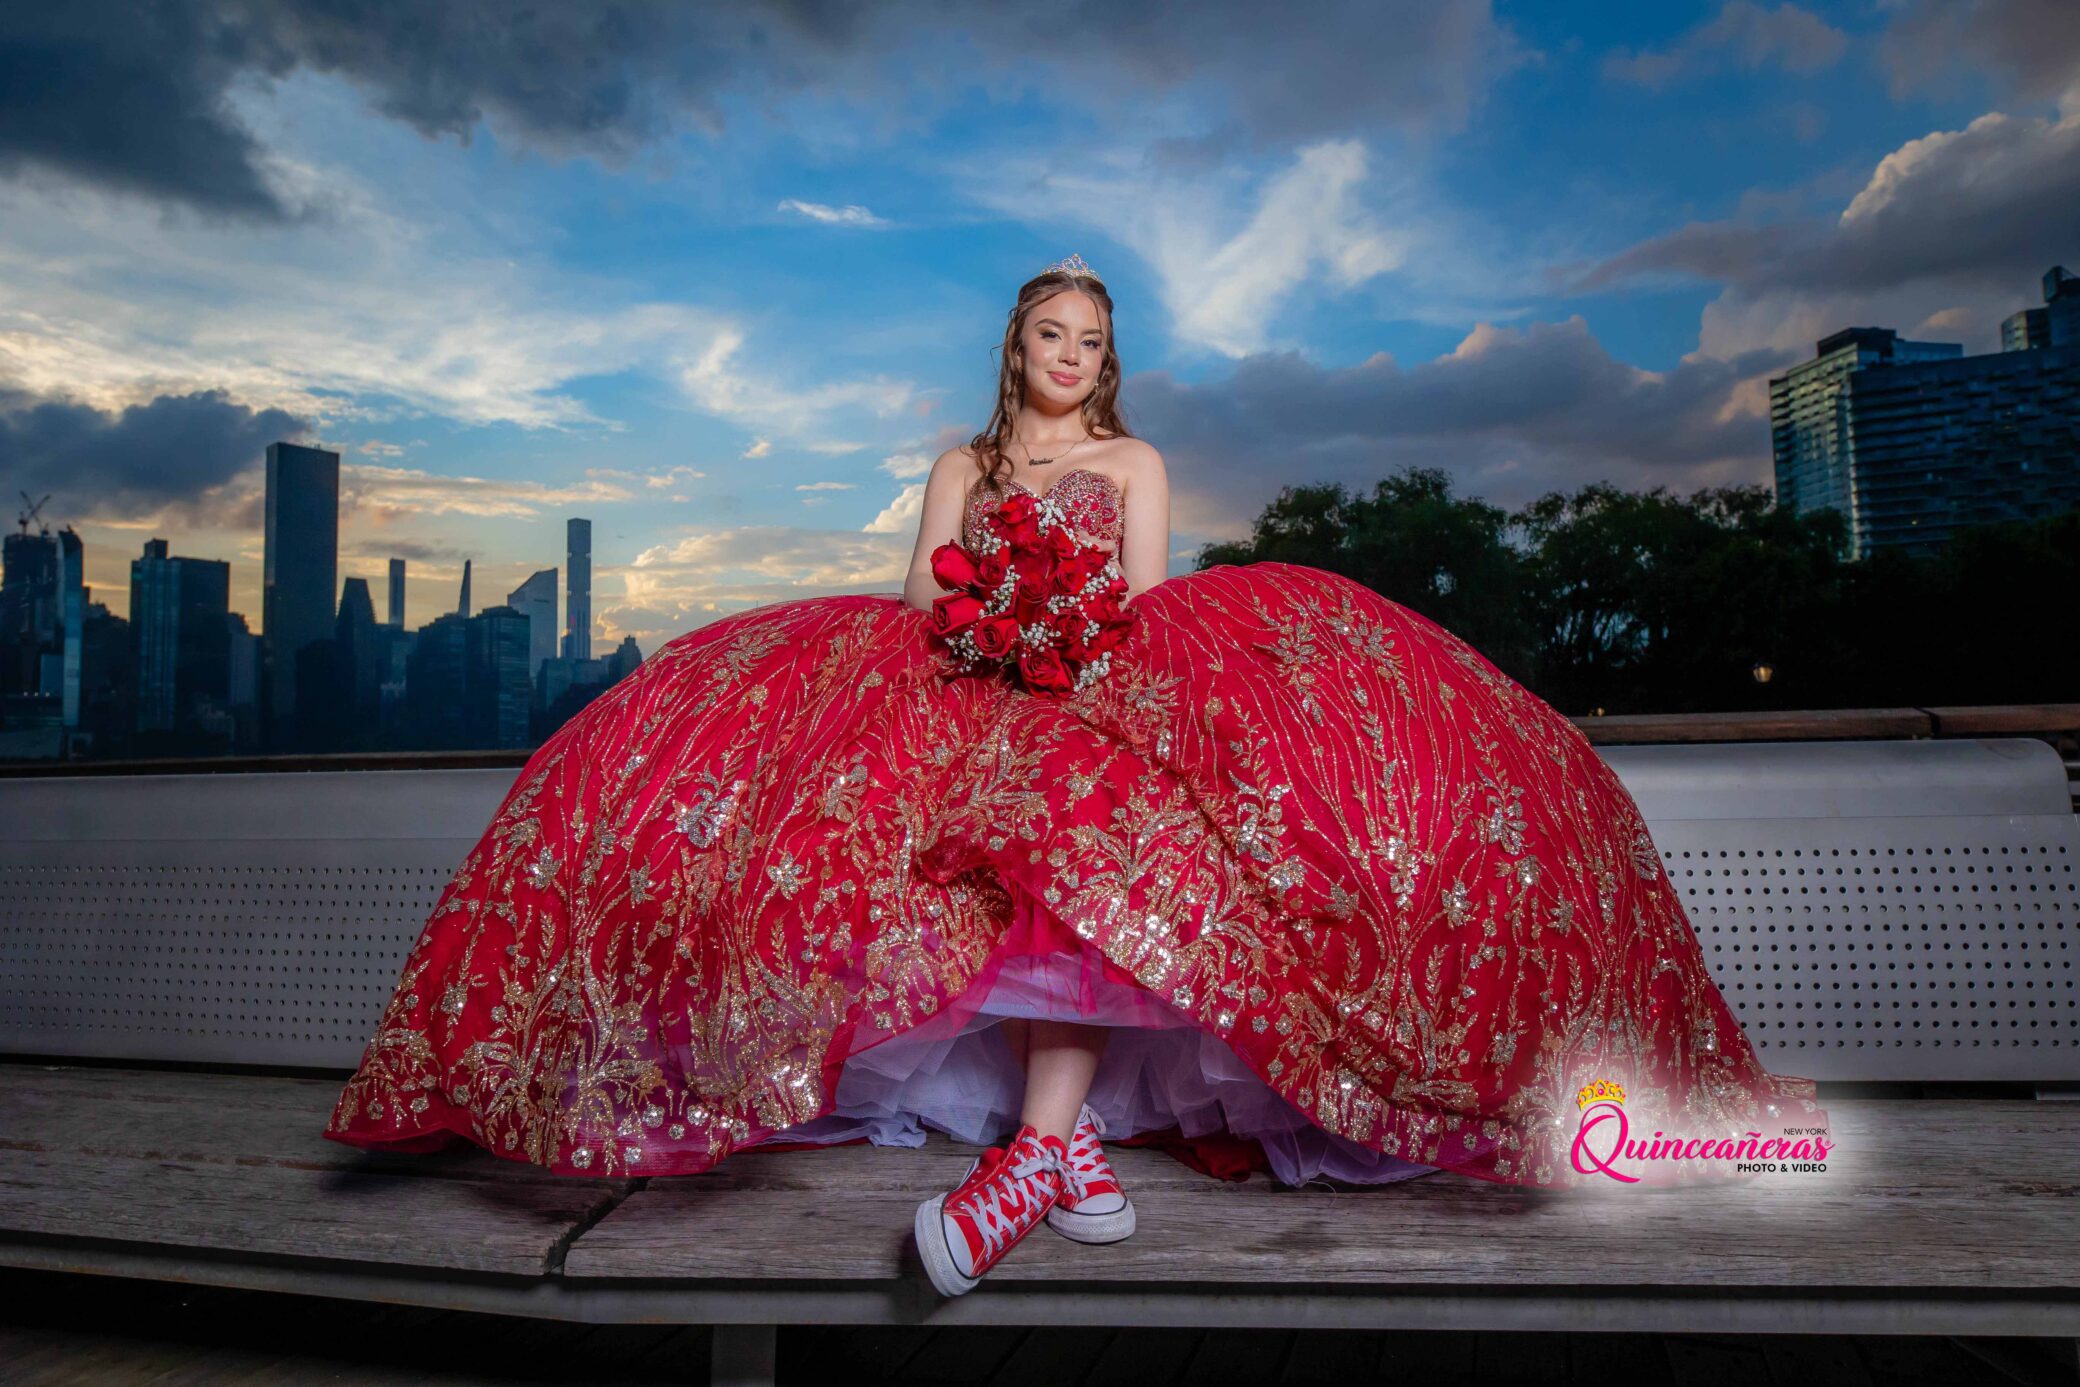 Sweet 16 Photographer serving the NYC Tristate area. New York, New Jersey, Connecticut photographer specializin in Quinceanera ( Quinceañera ).